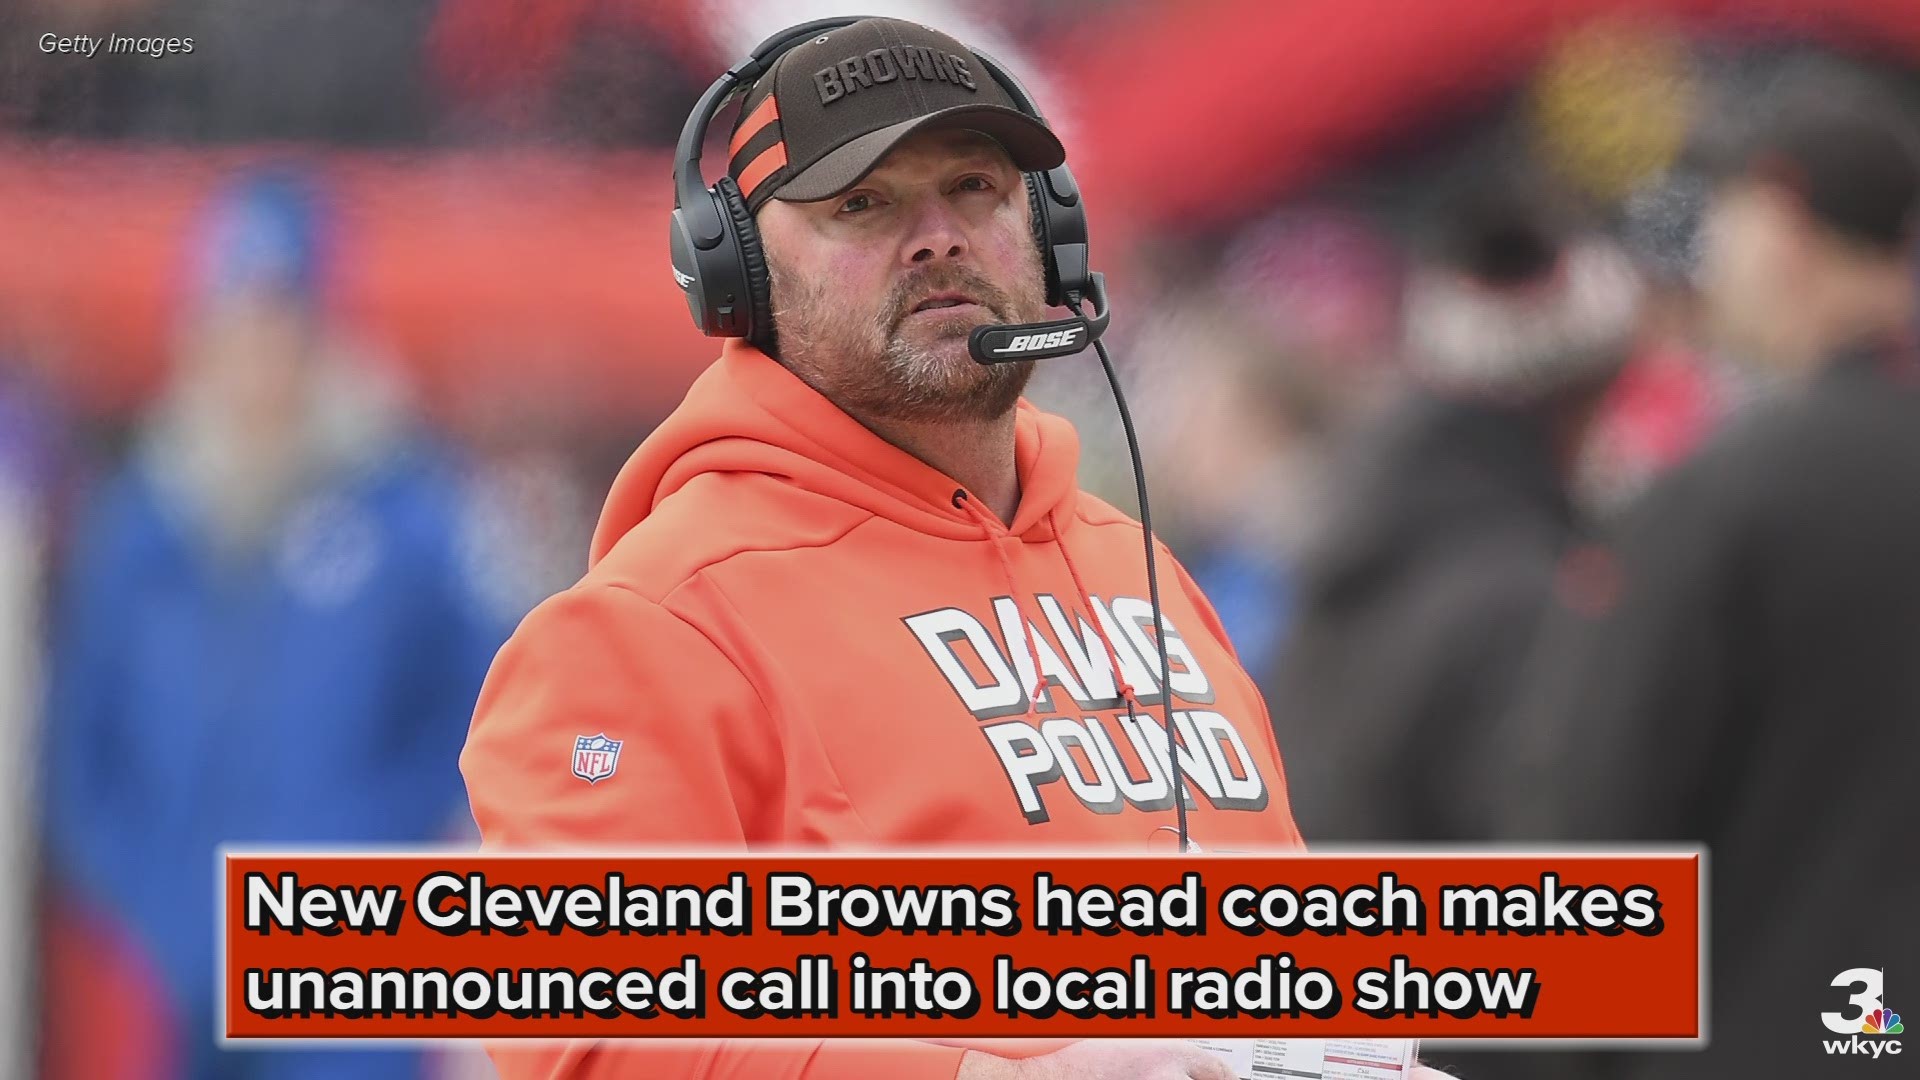 On Wednesday, Ken Carman and Anthony Lima of 92.3 The Fan got an unexpected call from new Cleveland Browns head coach Freddie Kitchens.